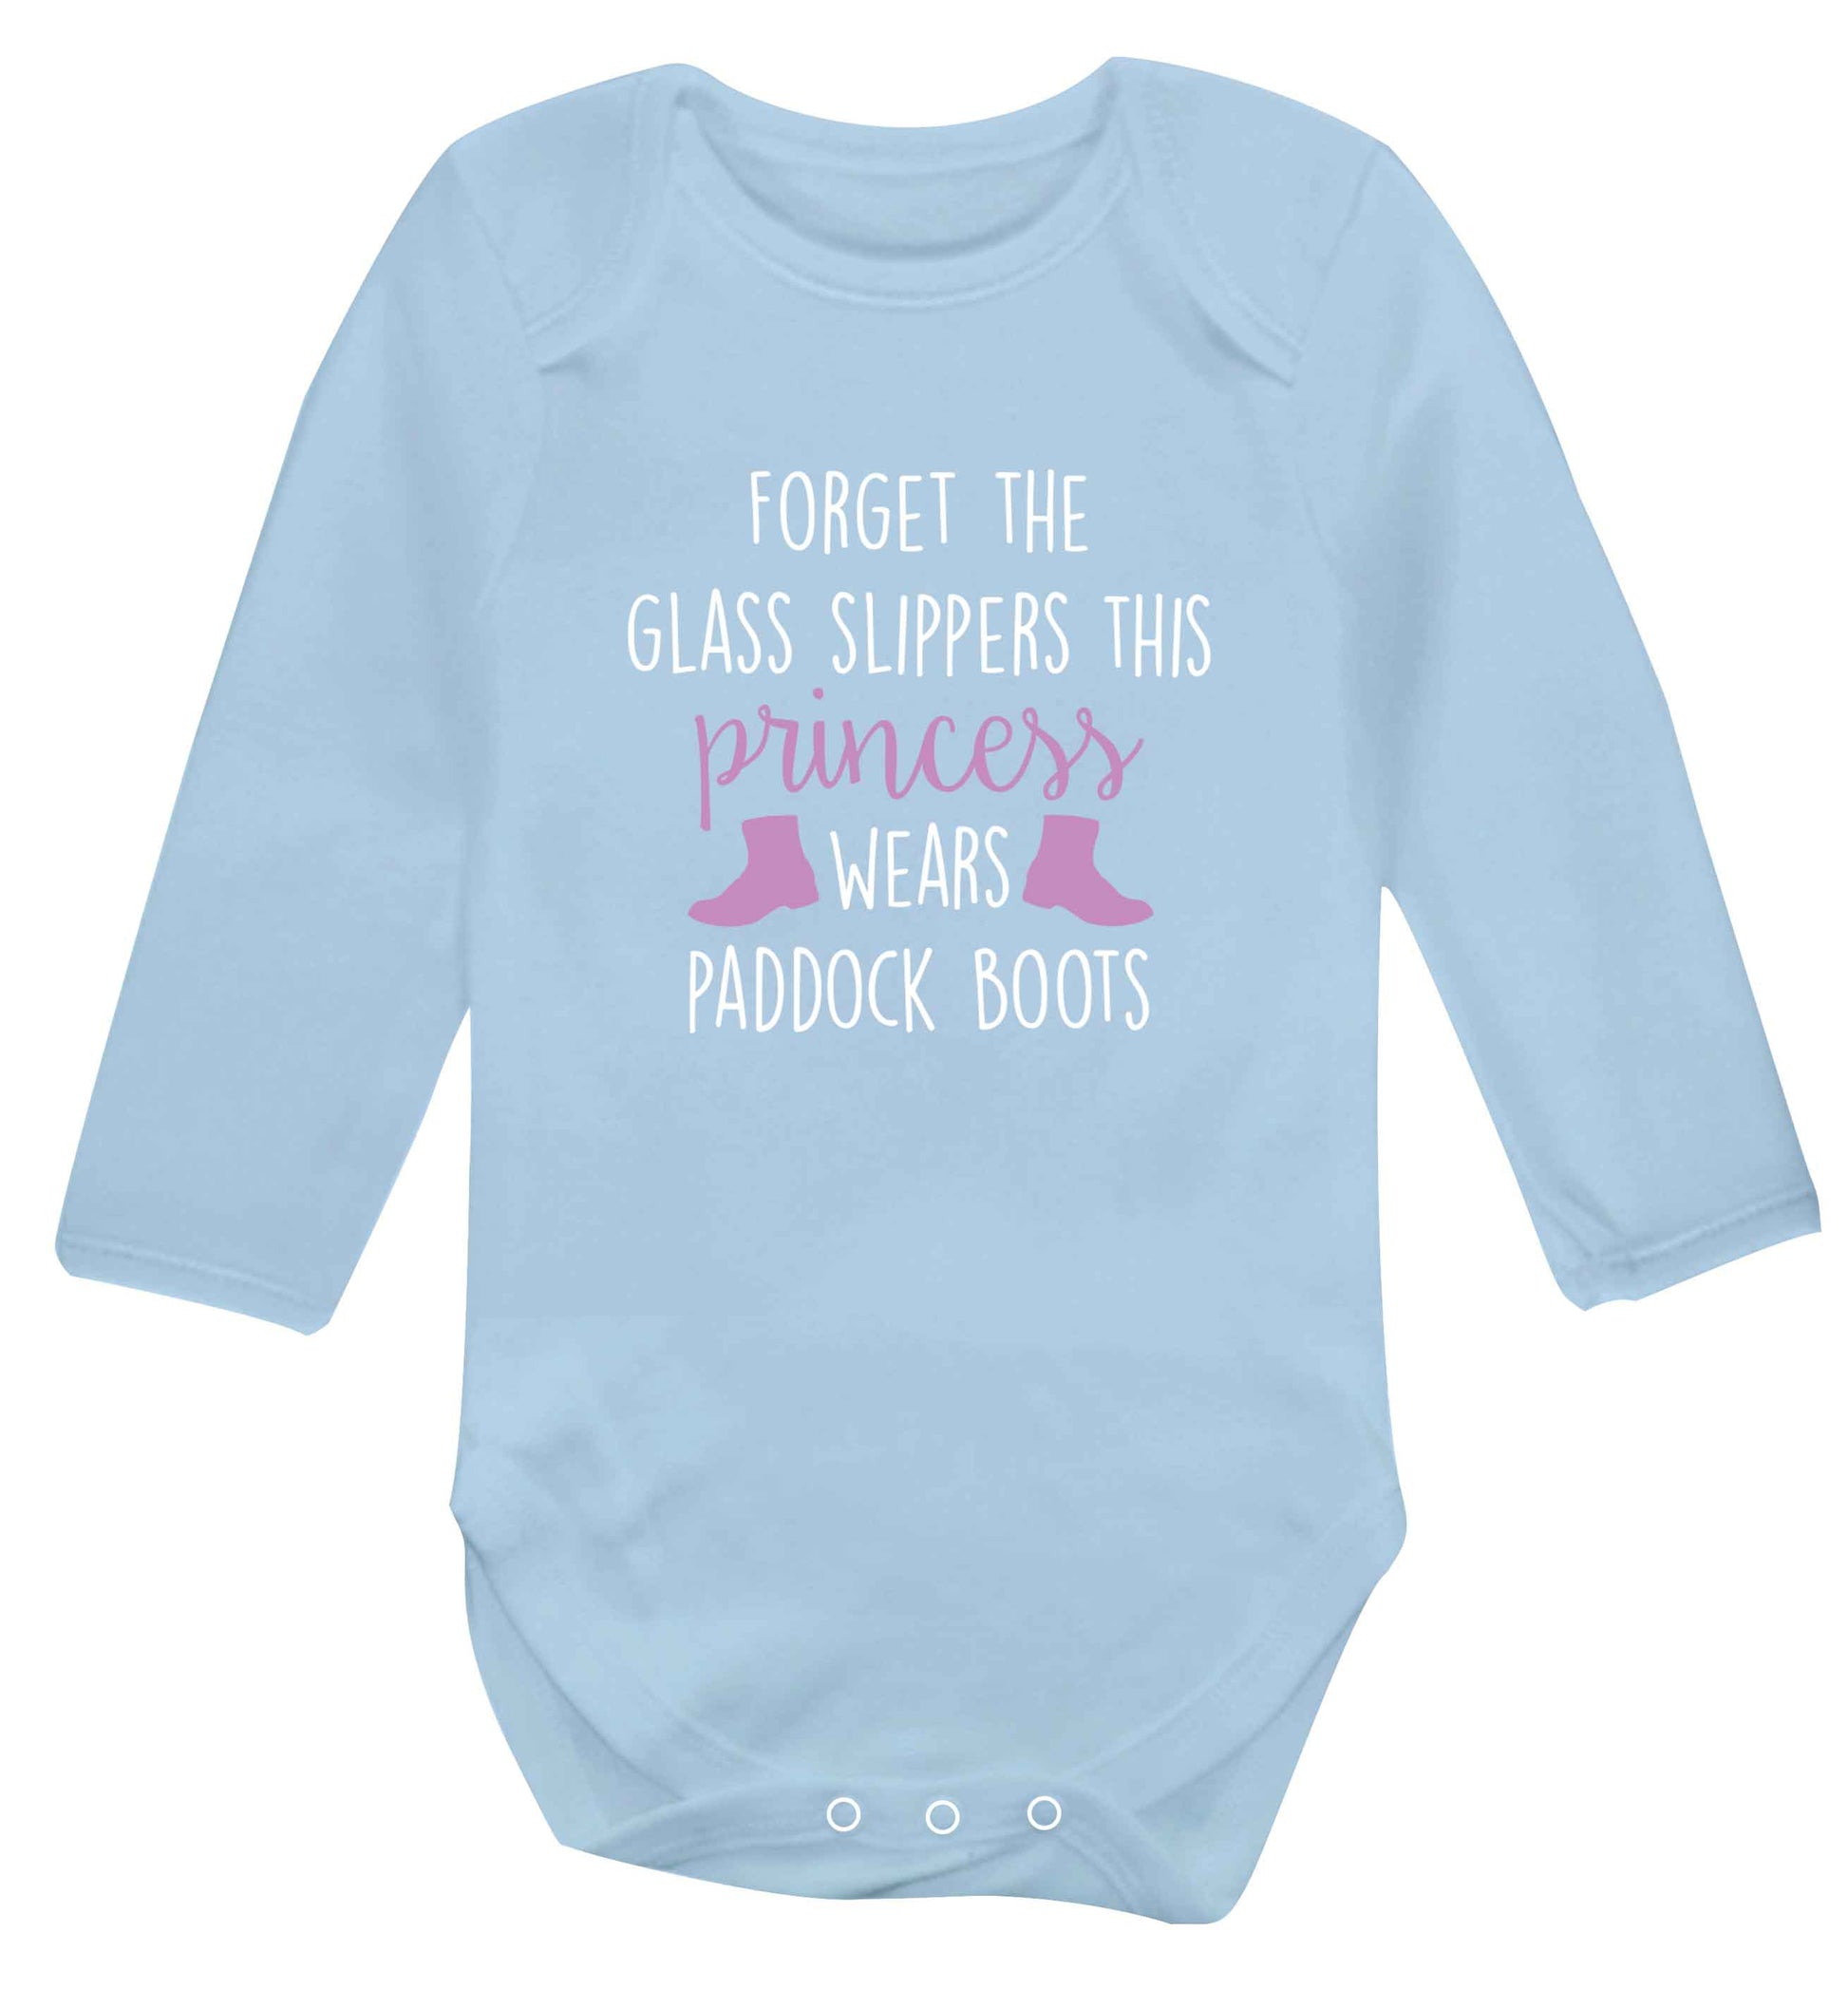 Forget the glass slippers this princess wears paddock boots baby vest long sleeved pale blue 6-12 months